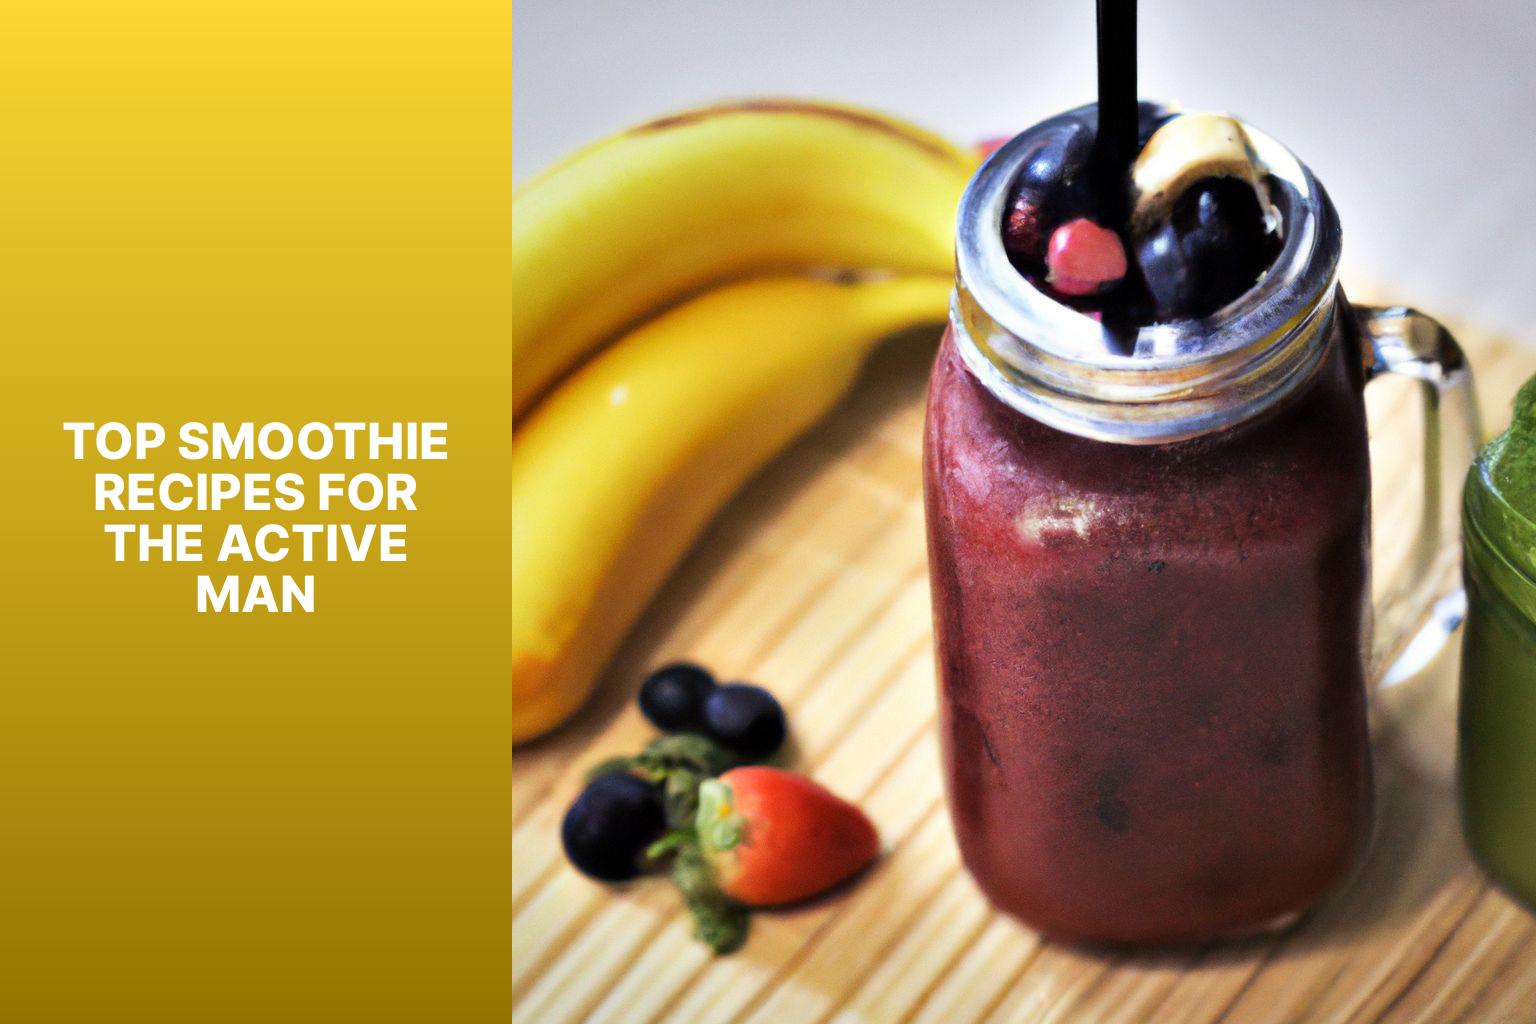 Top Smoothie Recipes for the Active Man - Smoothie Recipes for the Active Man 